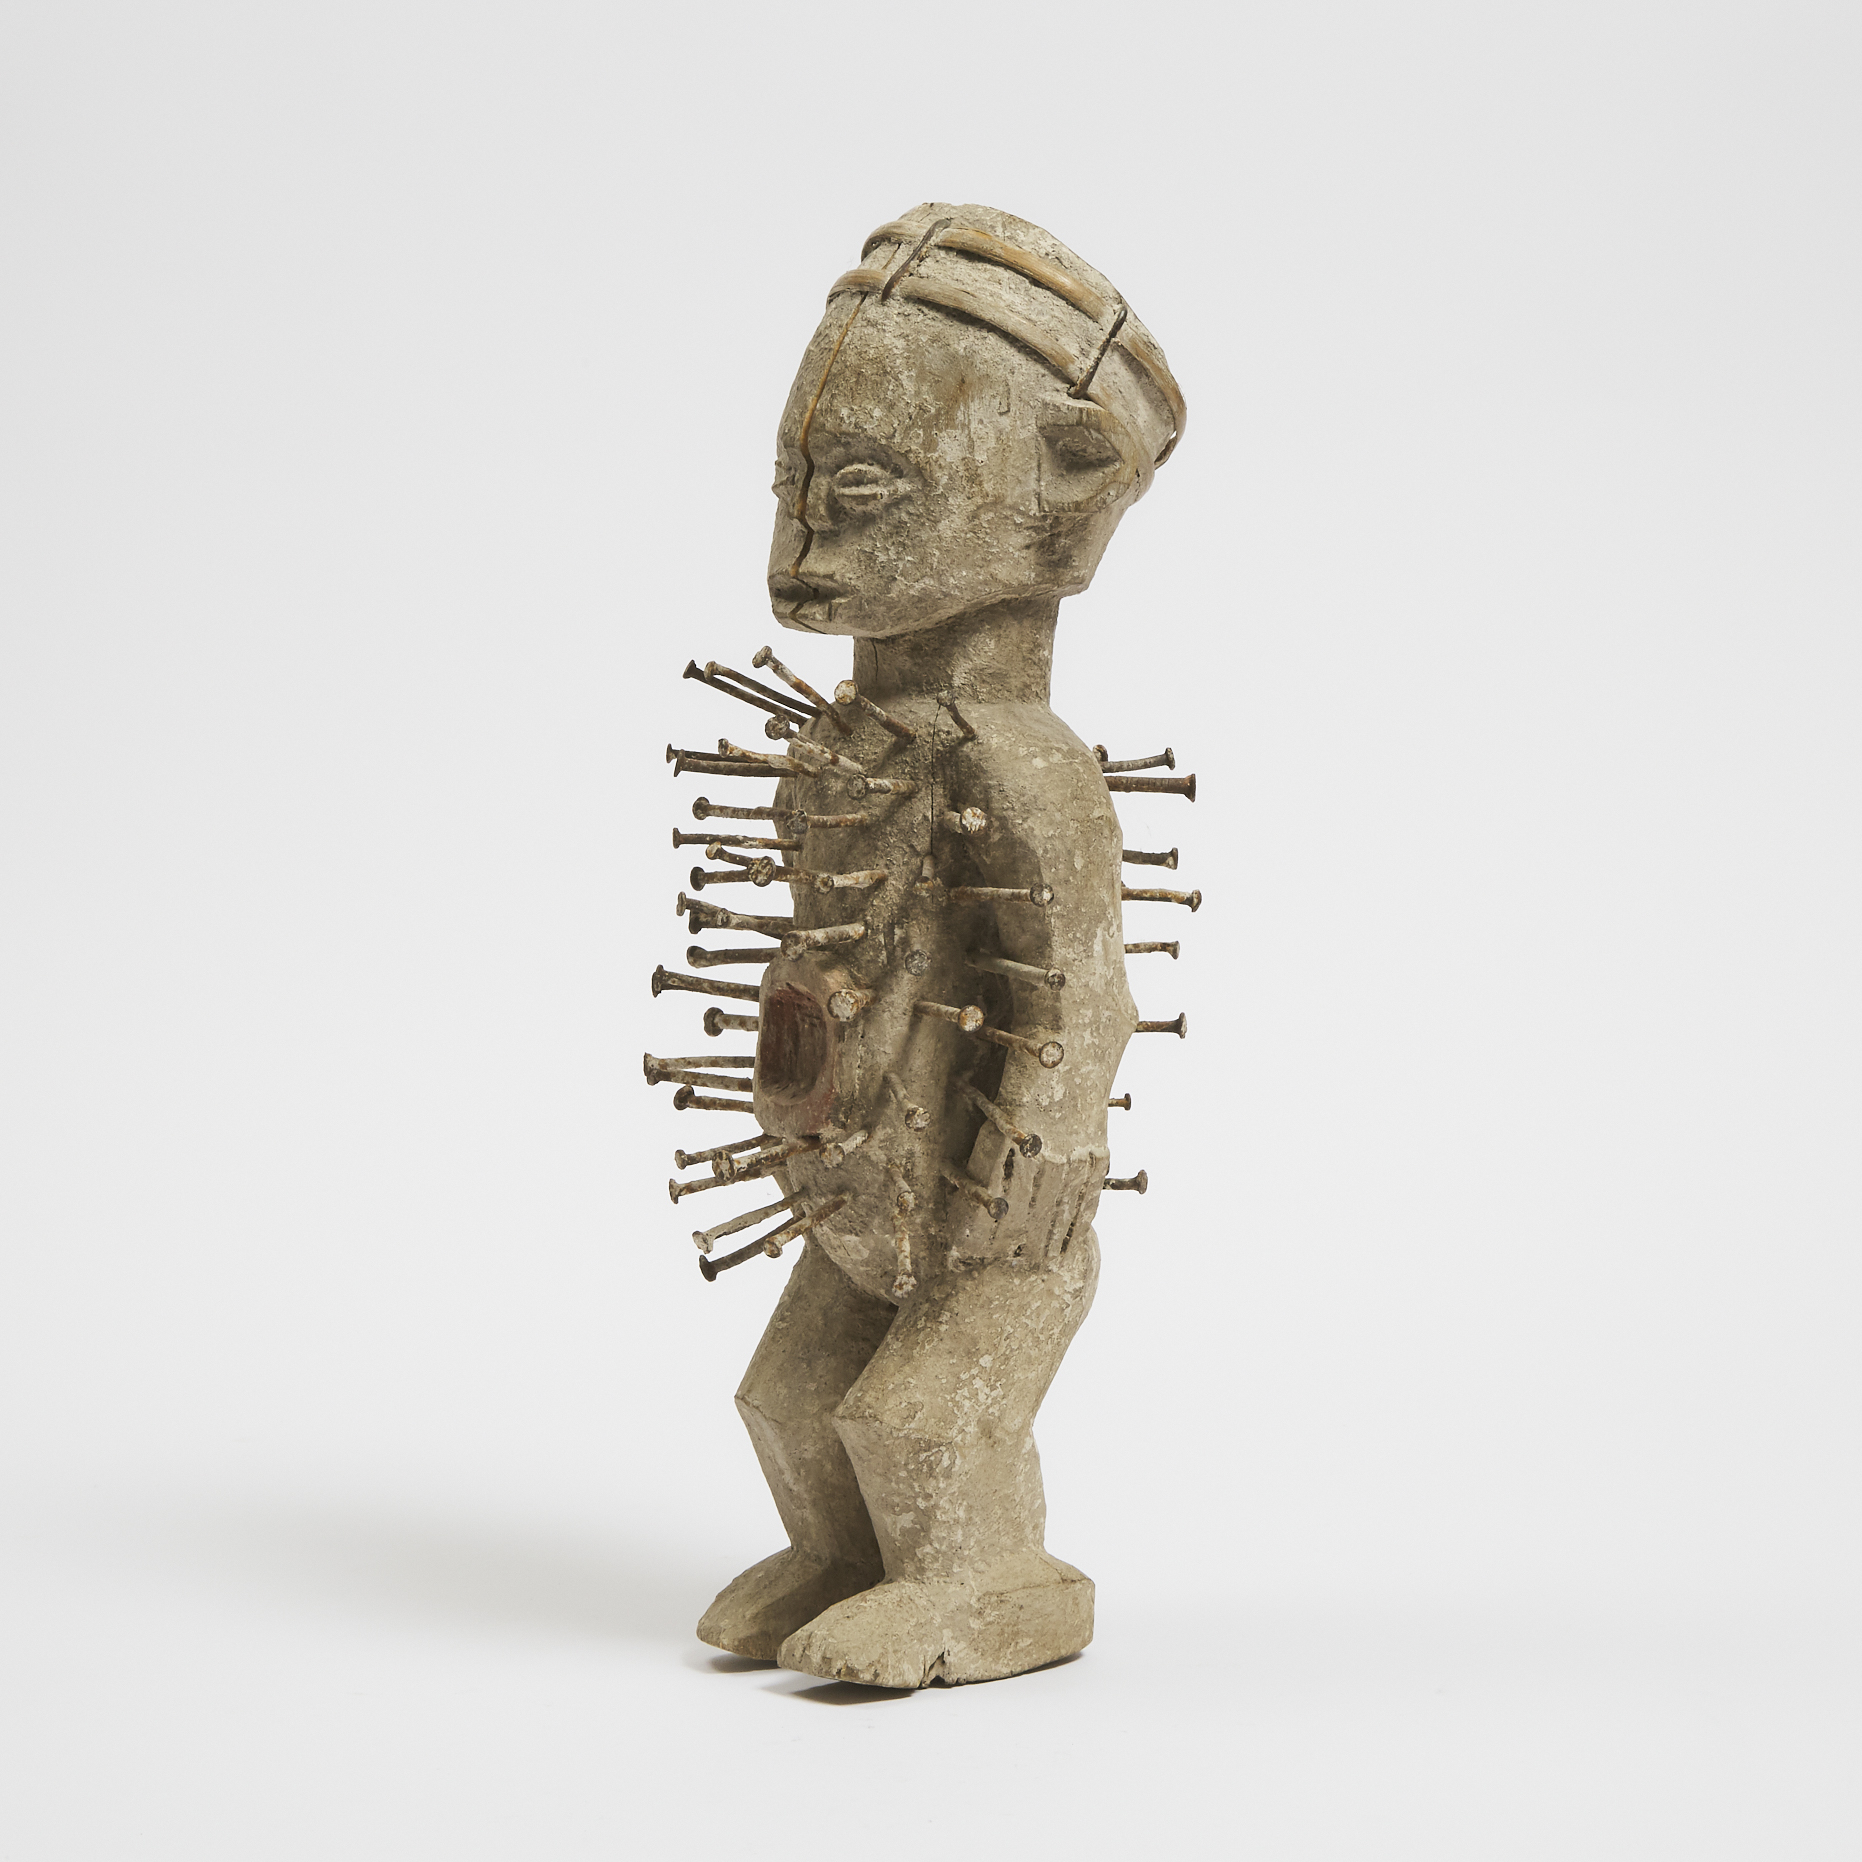 Kongo Power Figure, Democratic Republic of Congo, Central Africa, mid to late 20th century